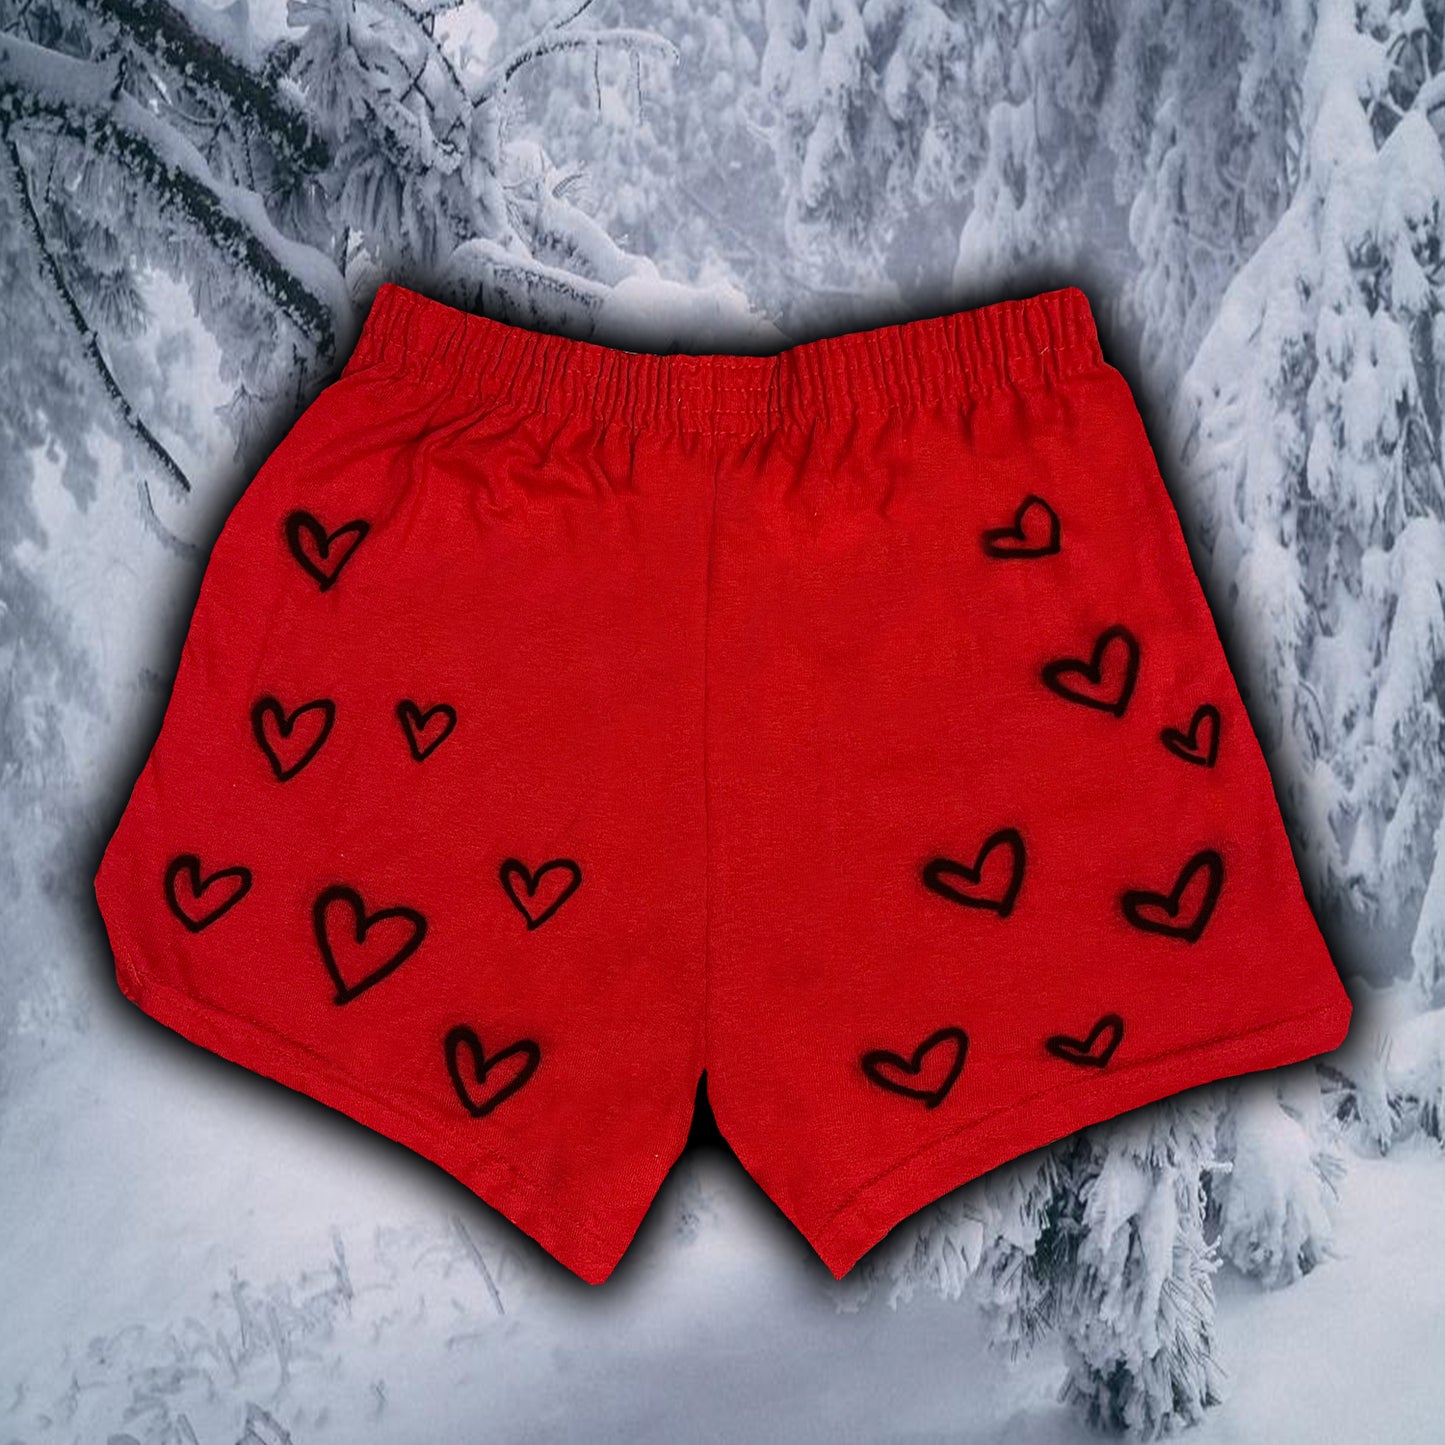 RED LACE CHEER SHORTS